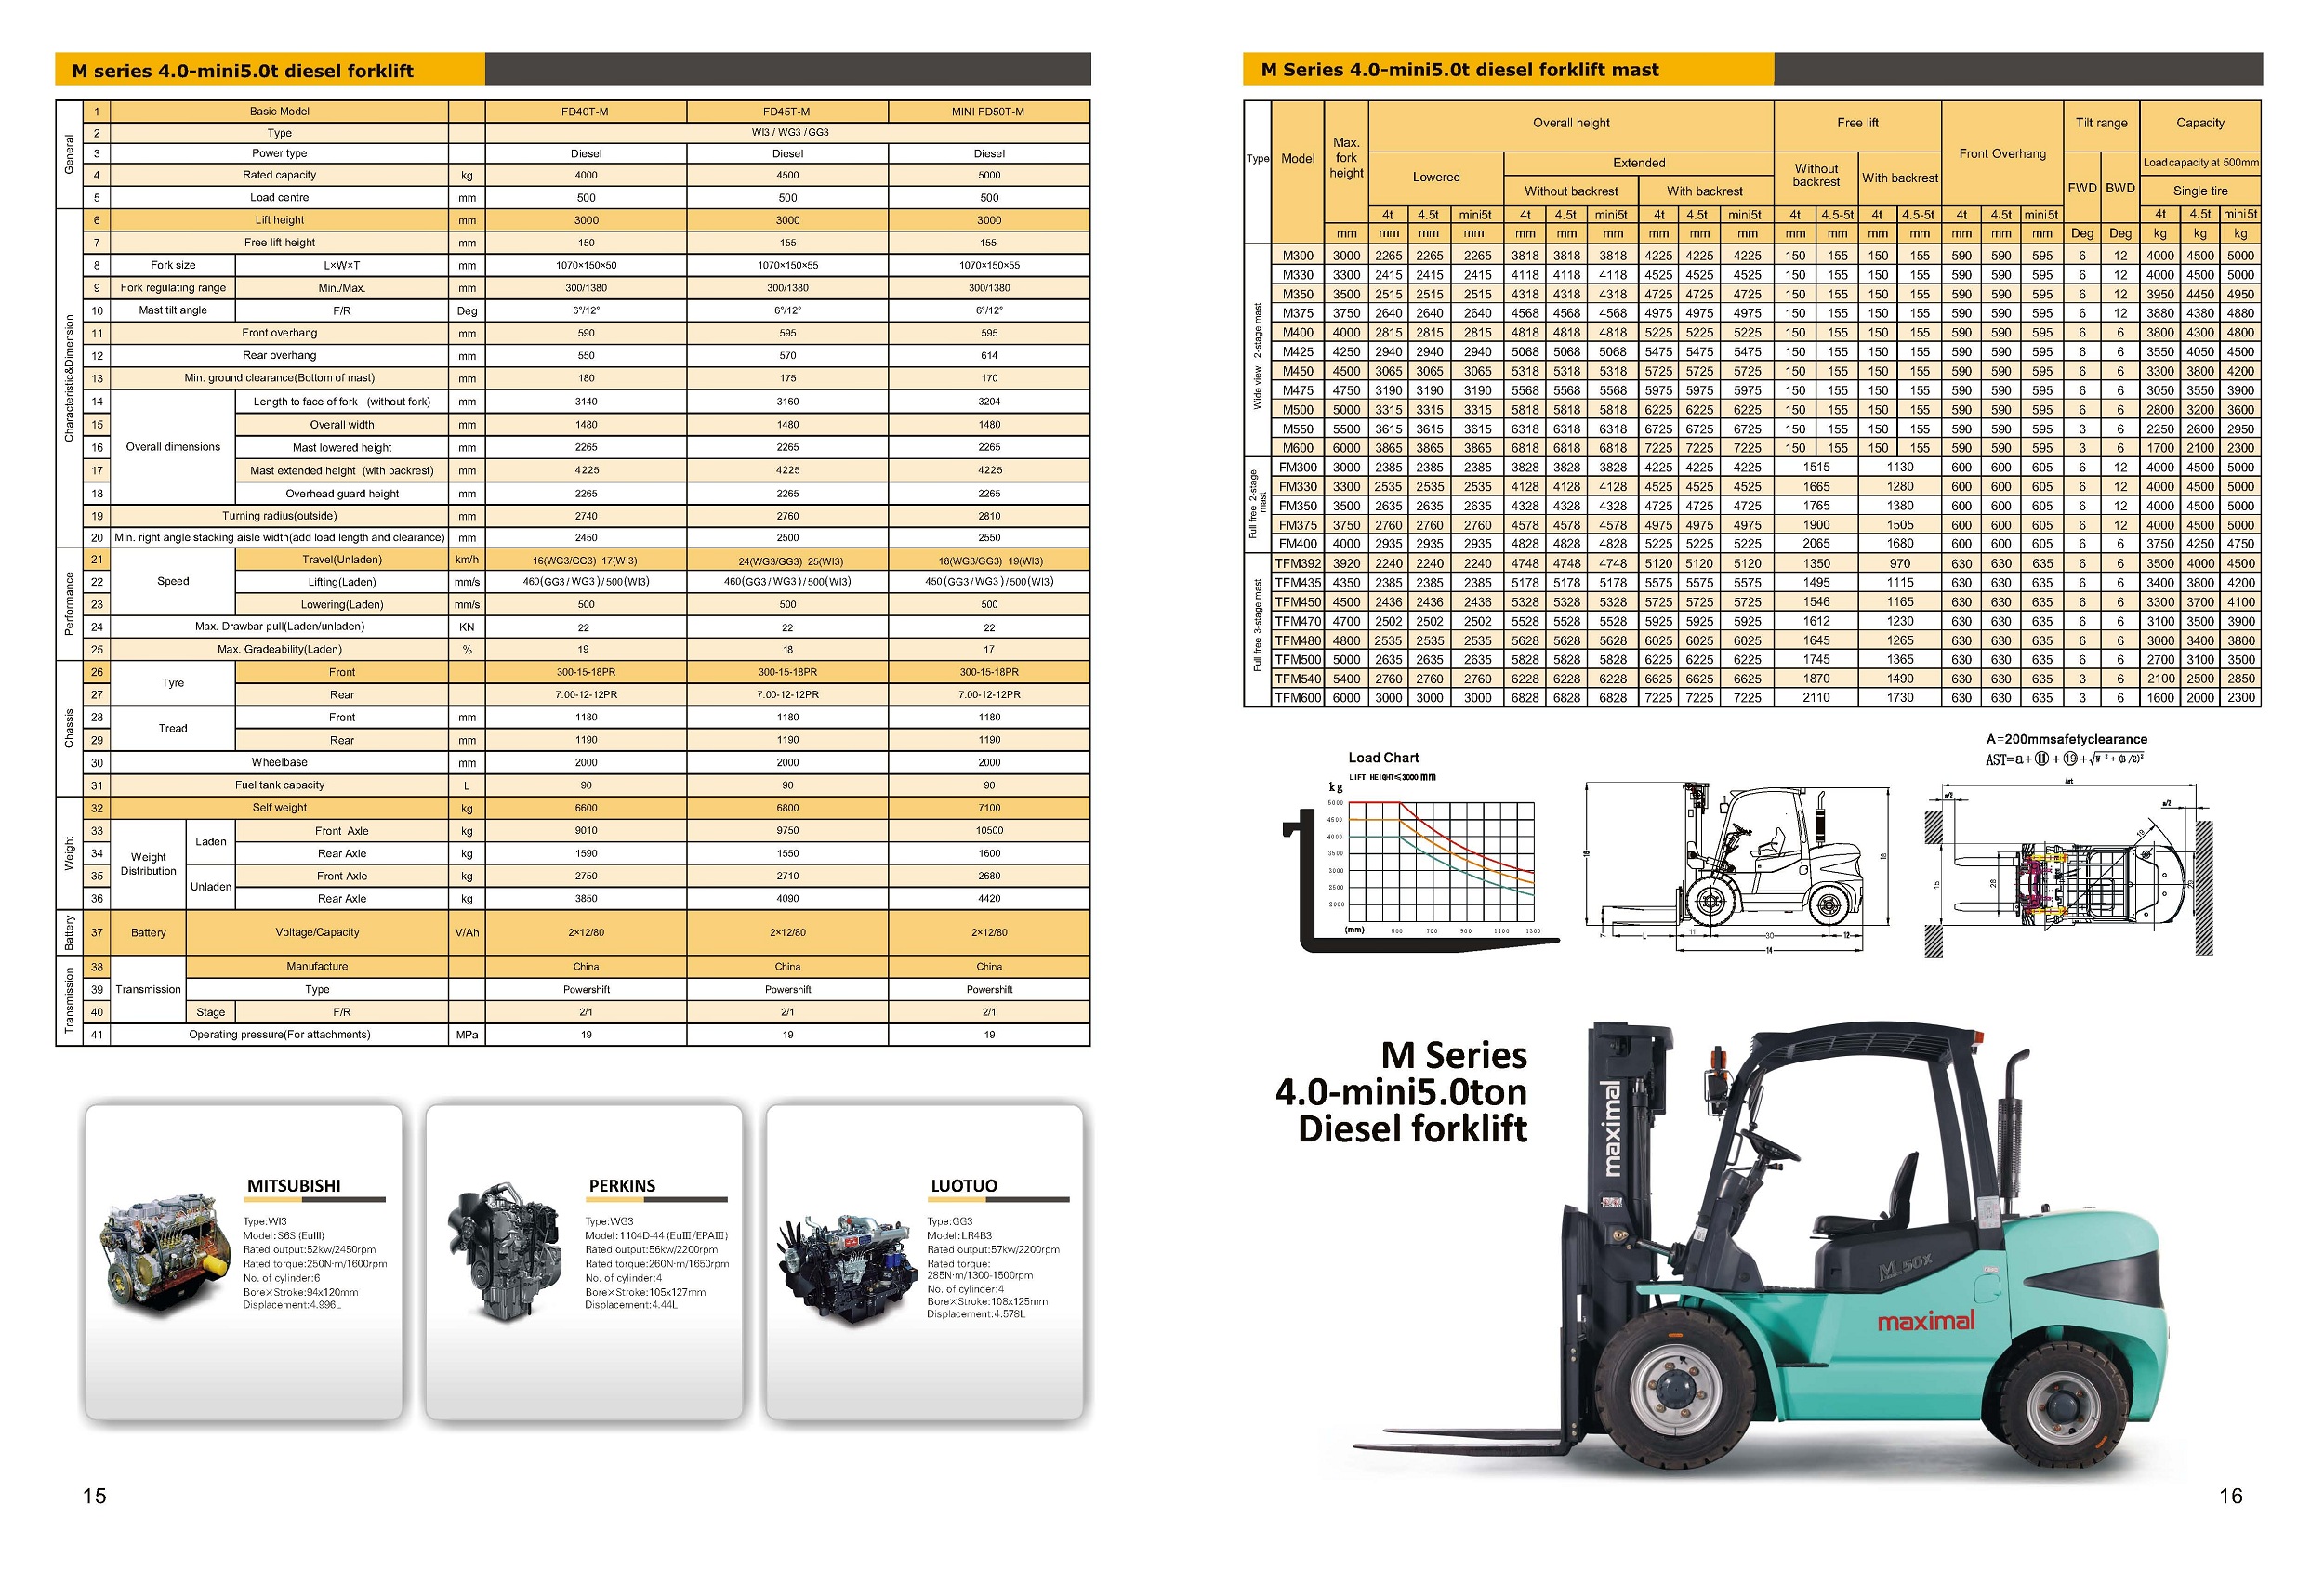 4 - 5 Tonne Maximal Diesel Forklift Specifications